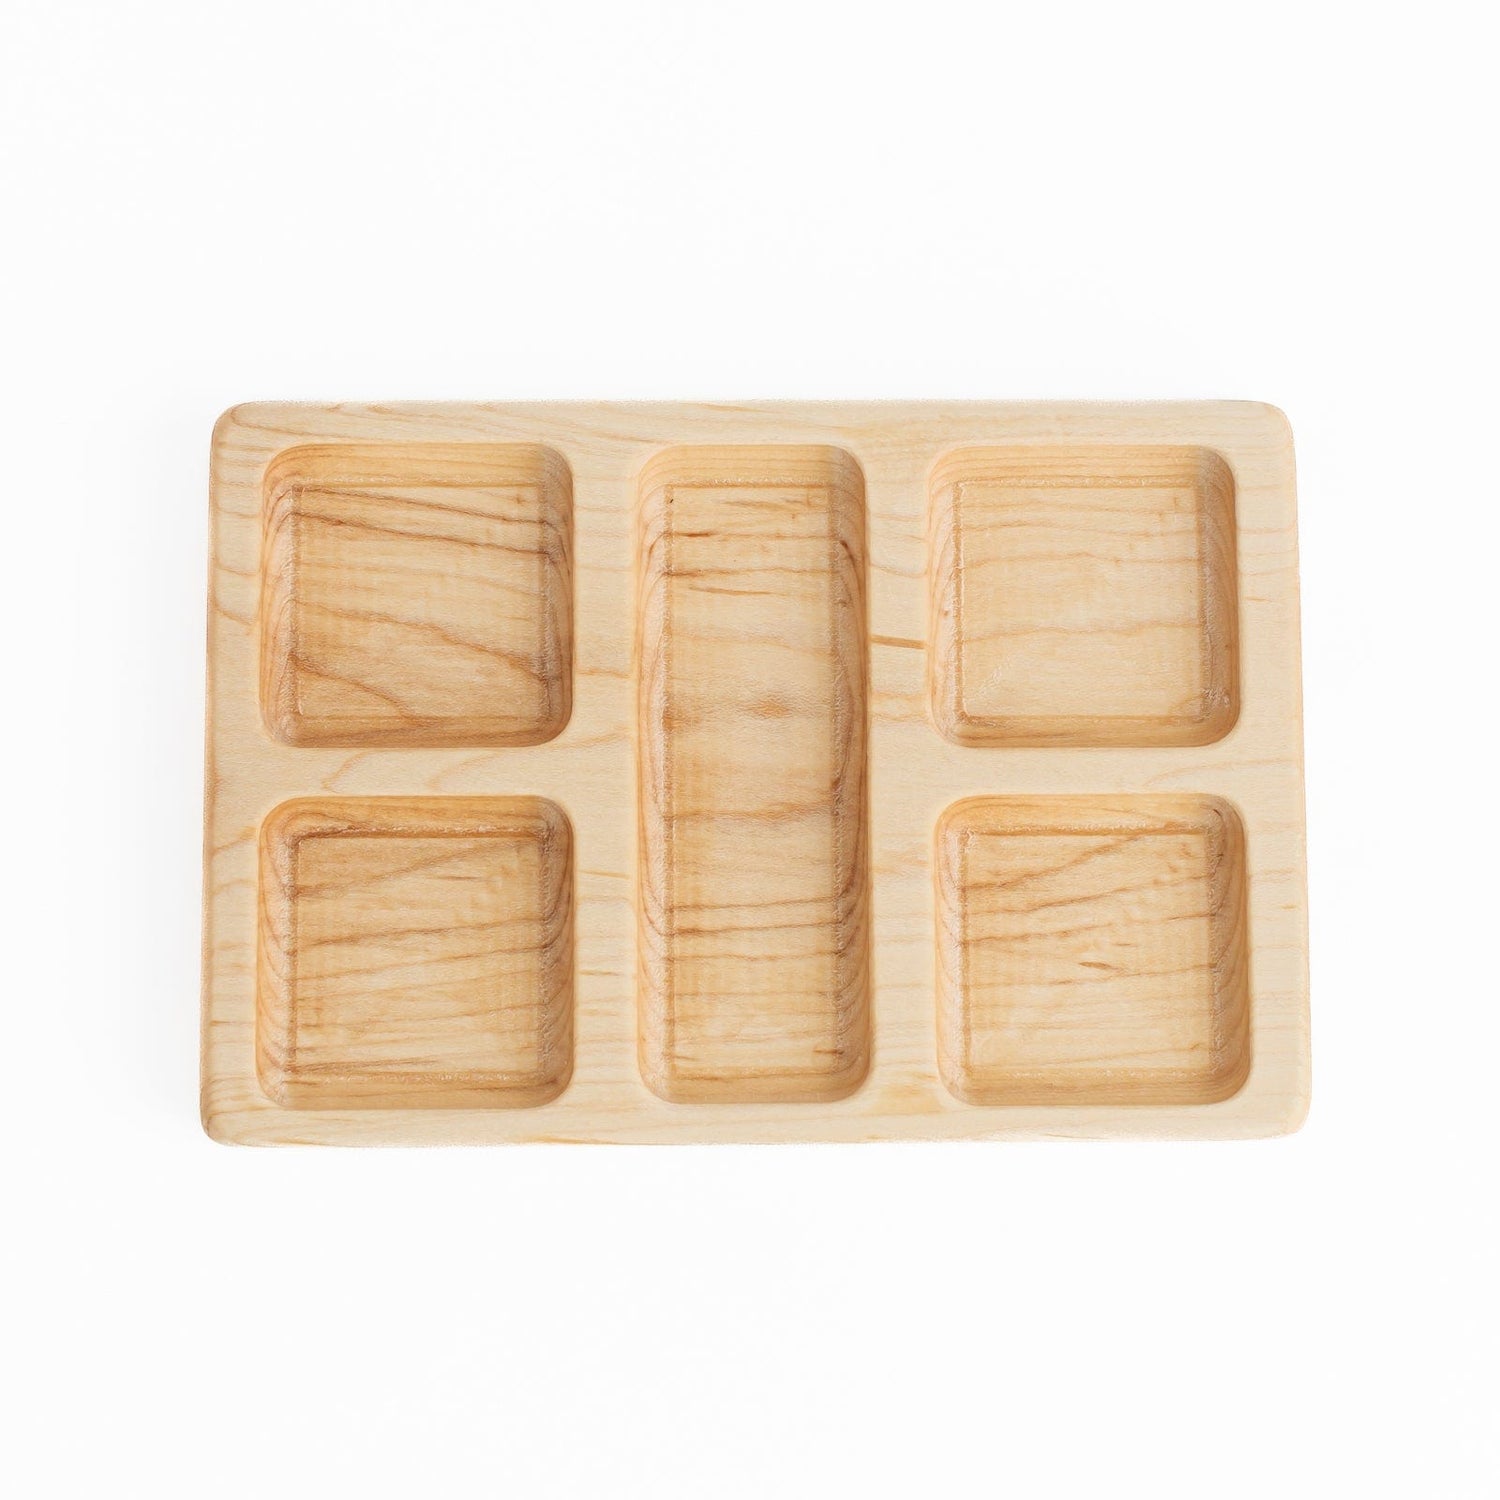 Aw & Co. Sensory Play Wooden Tinker Tray (Made in Canada)